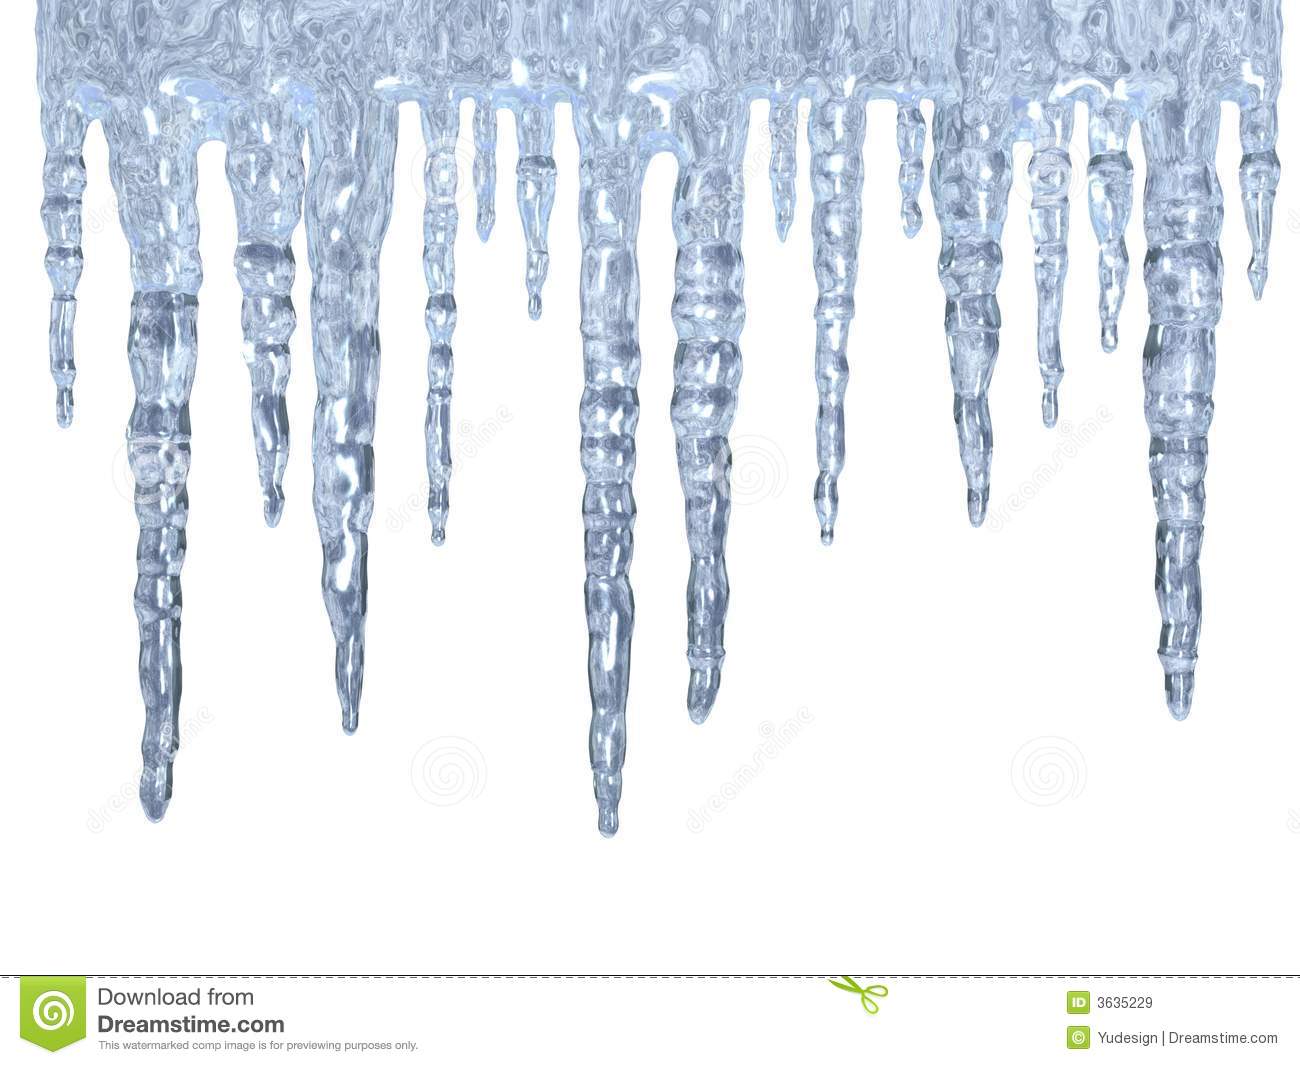 Icicle clipart #11, Download drawings